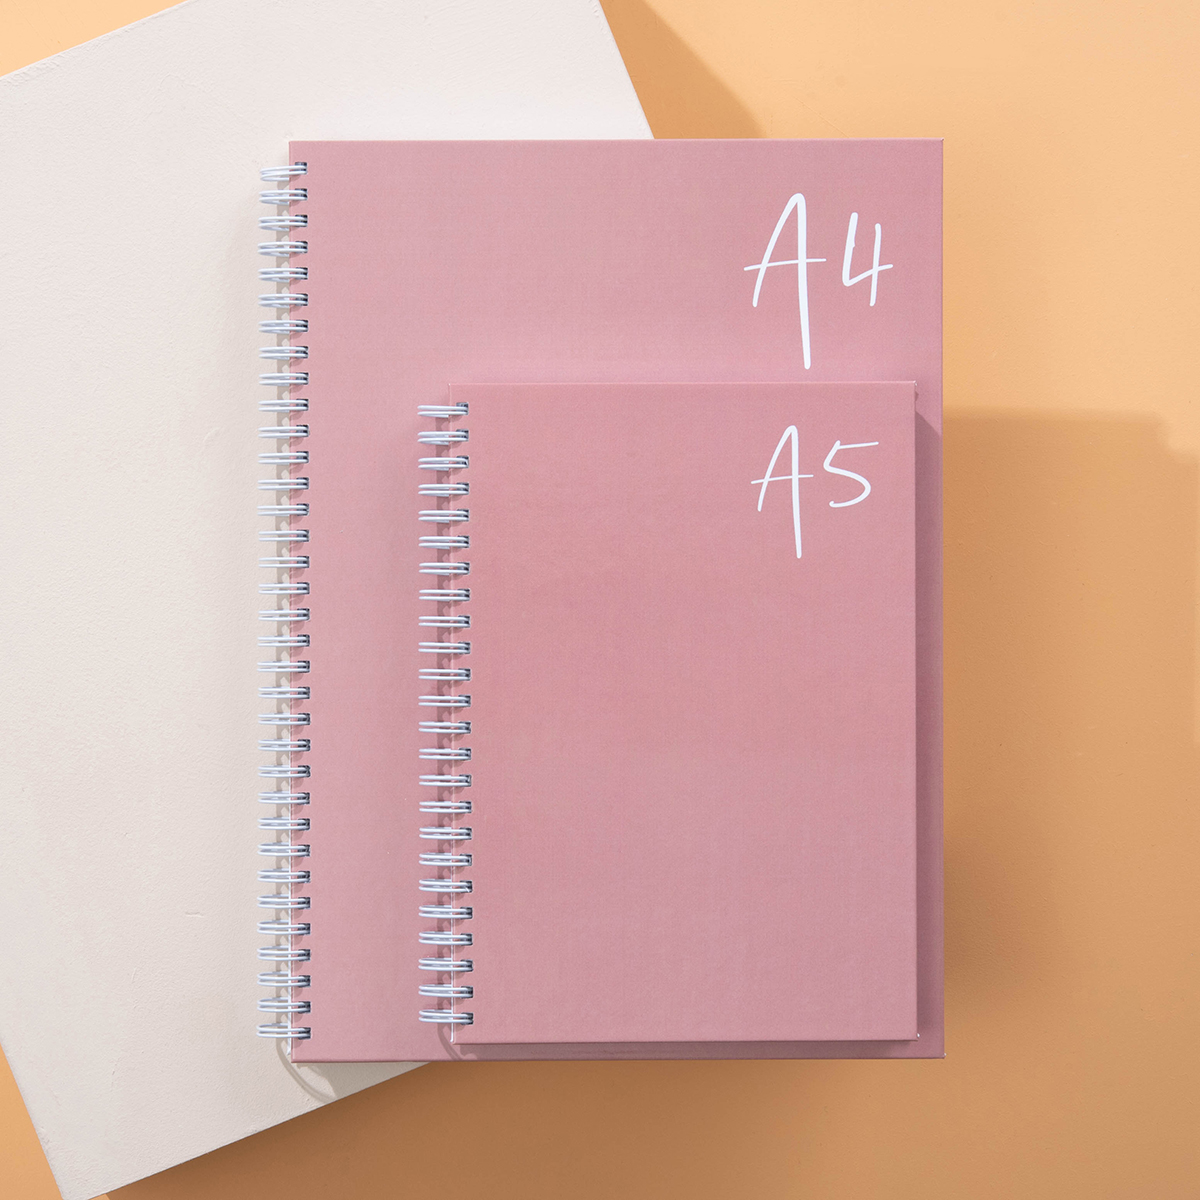 Personalised Notebook - Teacher's Notes